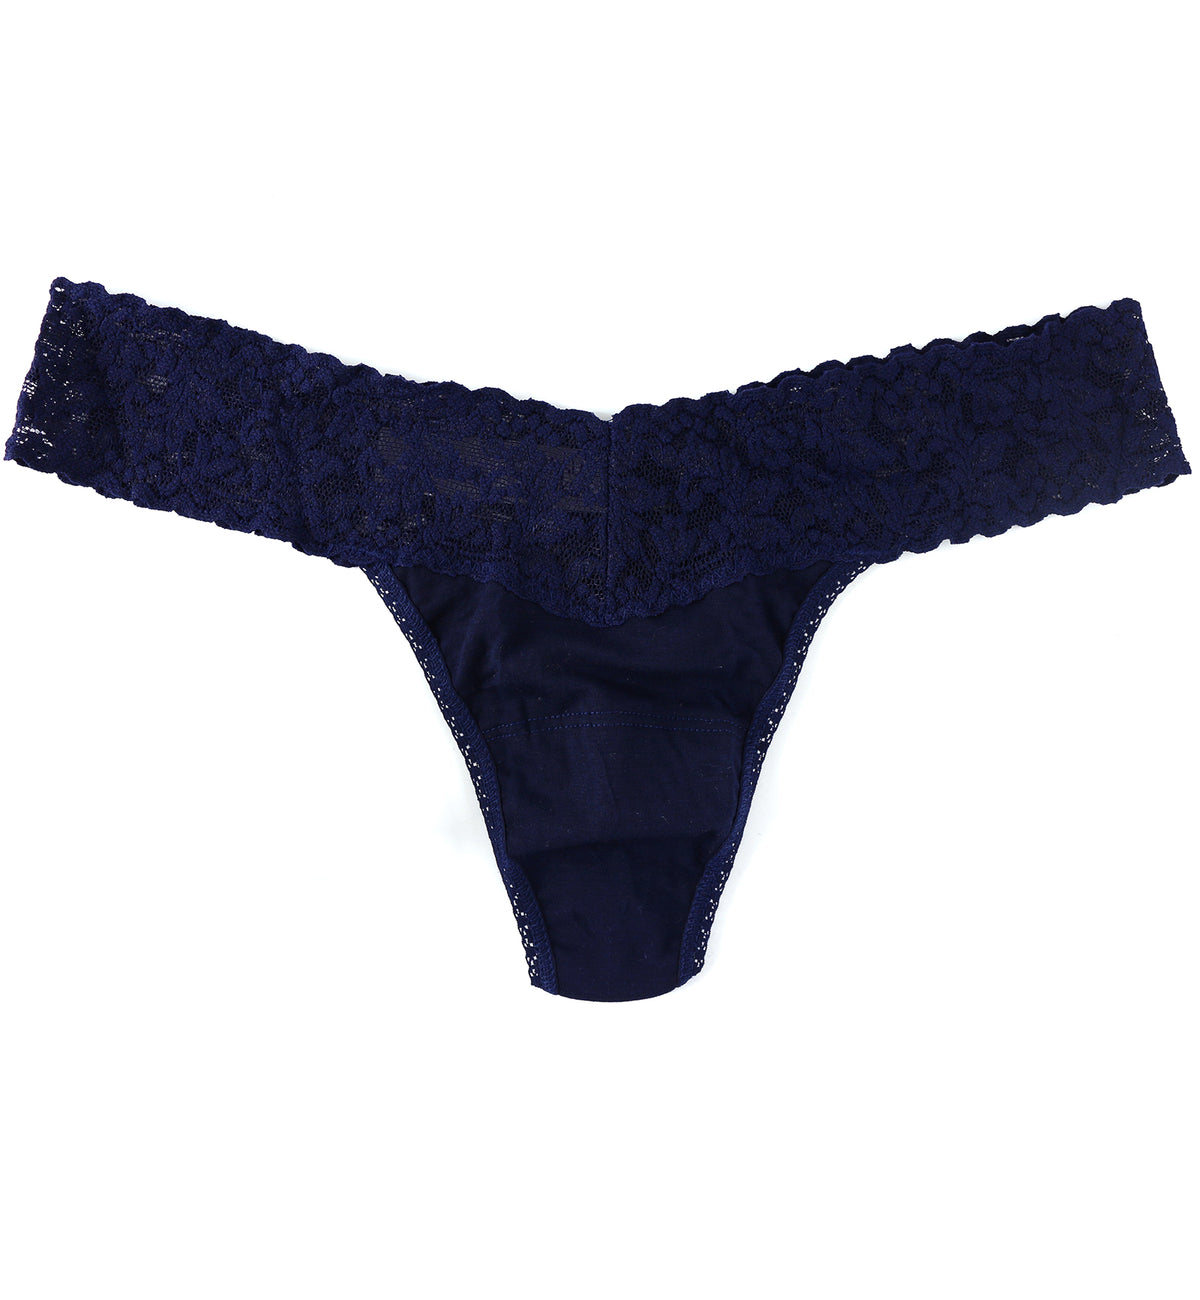 Hanky Panky Cotton Low Rise Thong (891581P),Navy - Navy,One Size